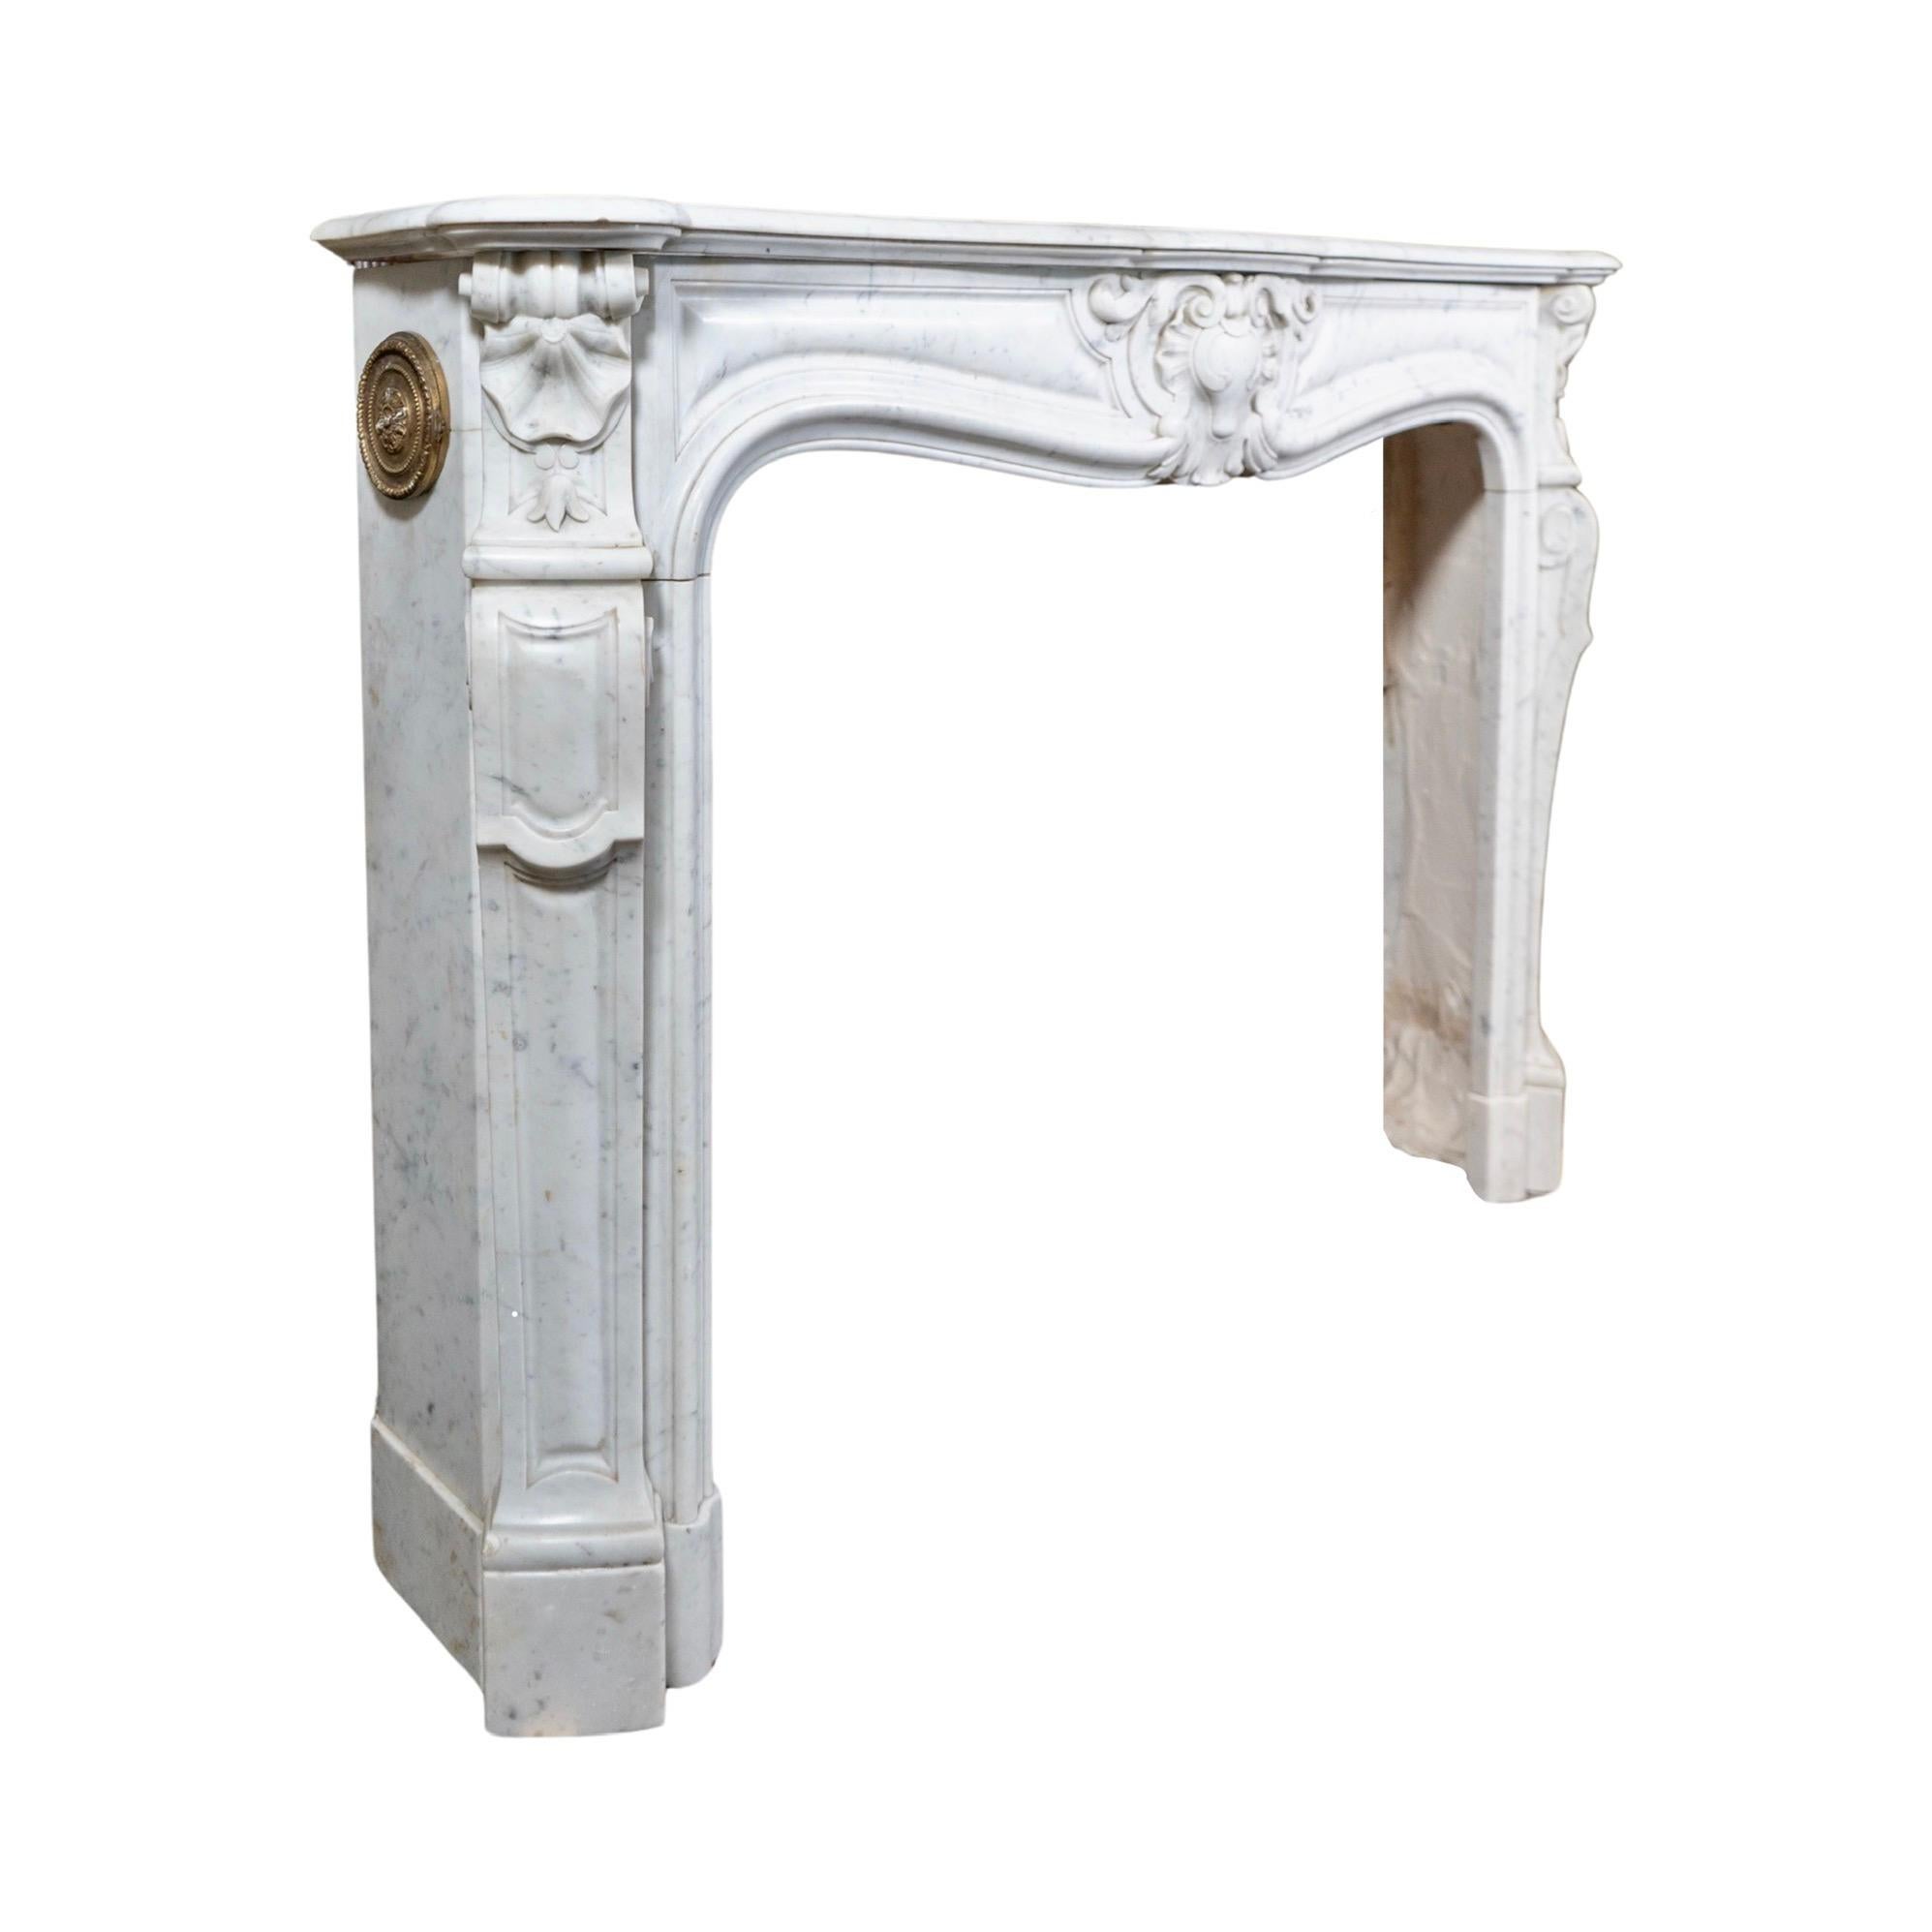 Late 19th Century French White Carrara Marble Mantel For Sale